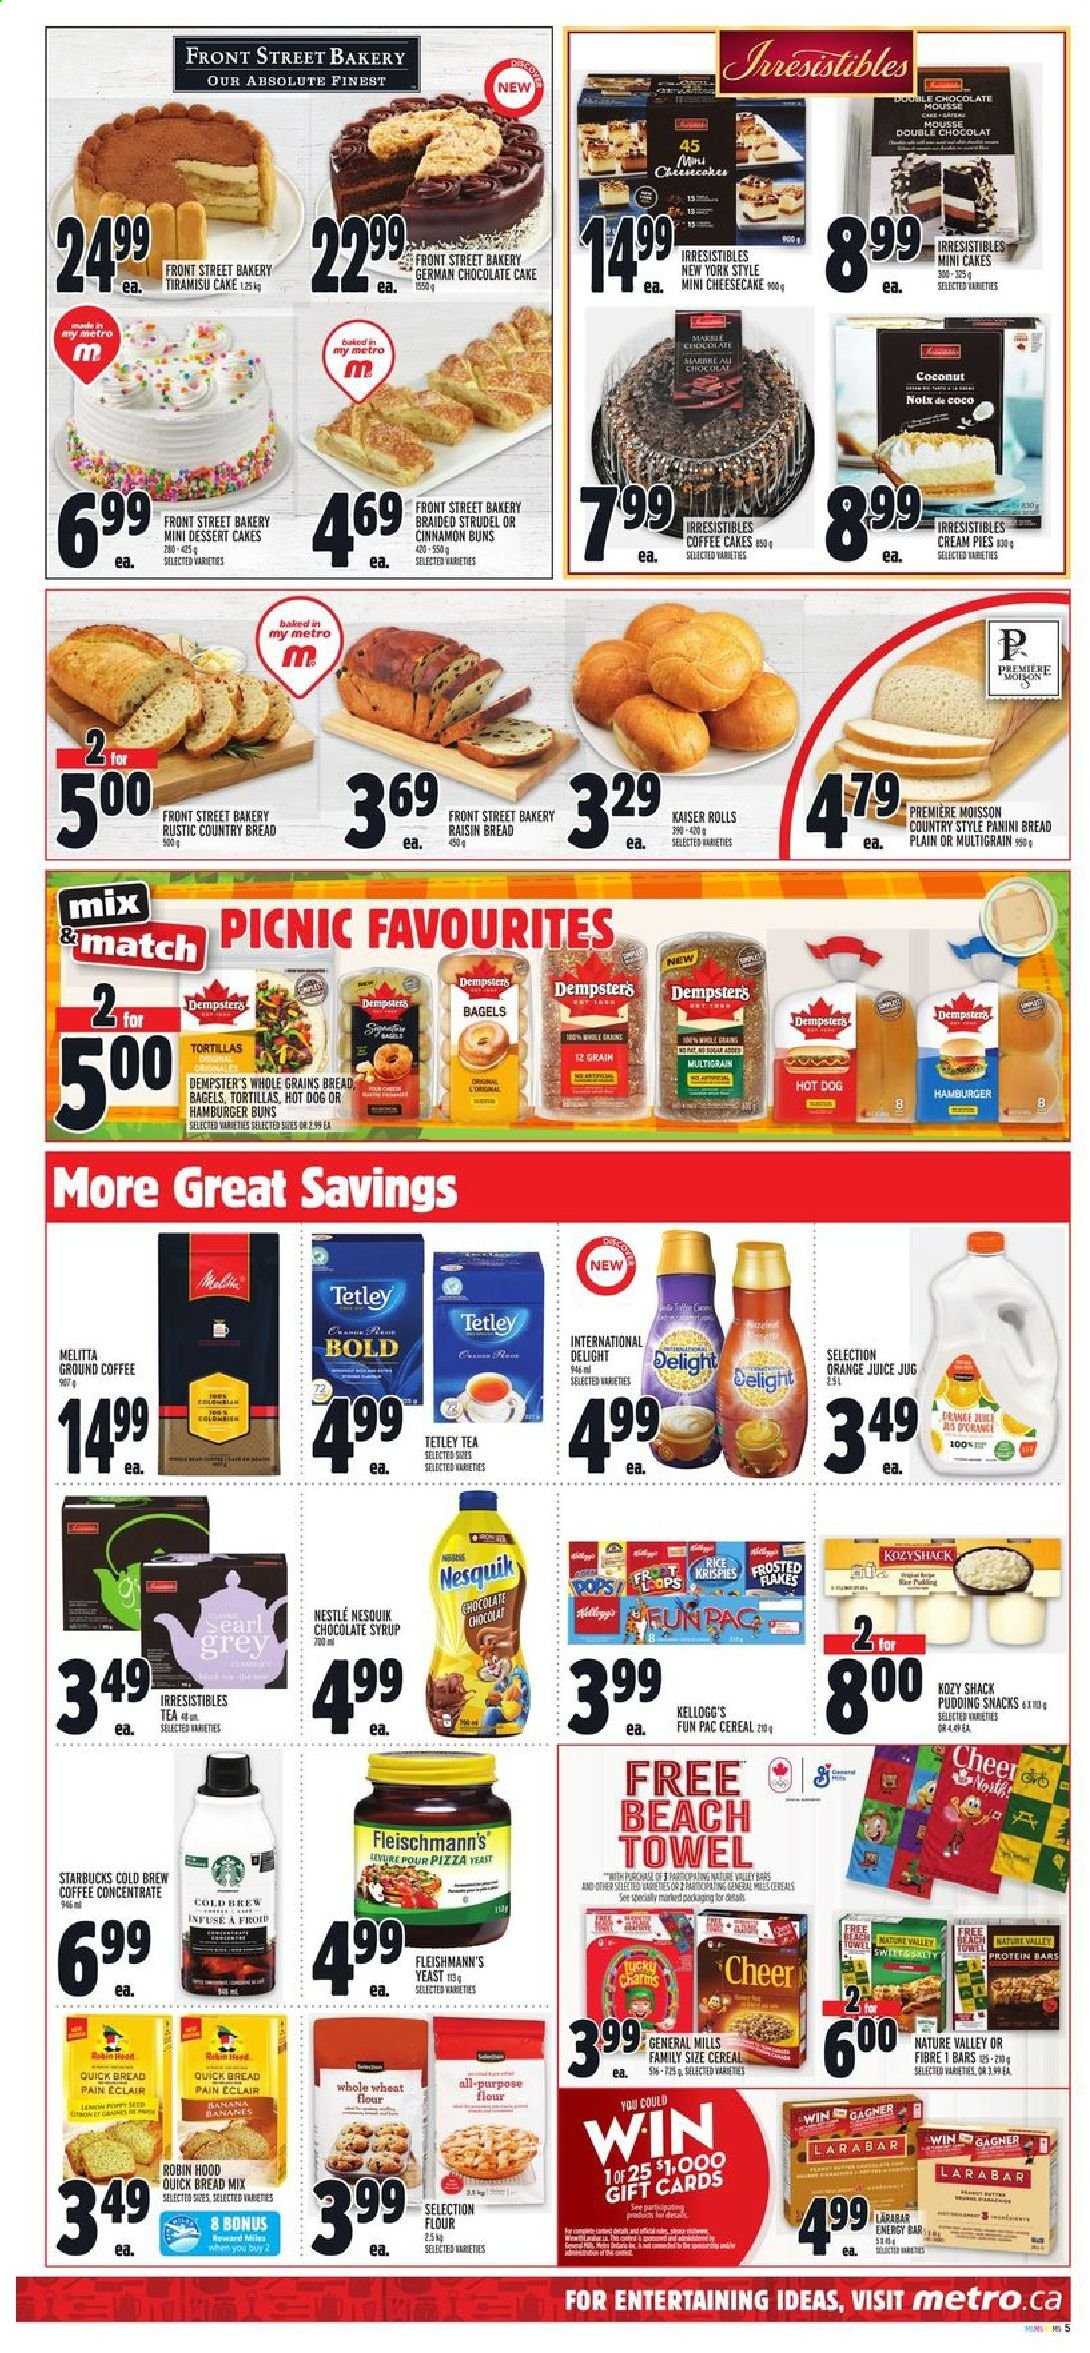 thumbnail - Metro Flyer - May 27, 2021 - June 02, 2021 - Sales products - bagels, bread, tortillas, panini, strudel, buns, burger buns, cheesecake, cream pie, tiramisu, chocolate cake, coconut, hot dog, yeast, snack, Kellogg's, wheat flour, whole wheat flour, cereals, protein bar, Frosted Flakes, Nature Valley, rice, cinnamon, chocolate syrup, syrup, orange juice, tea, ground coffee, Starbucks, Absolute, towel, beach towel, PREMIERE, Nesquik, Nestlé. Page 5.